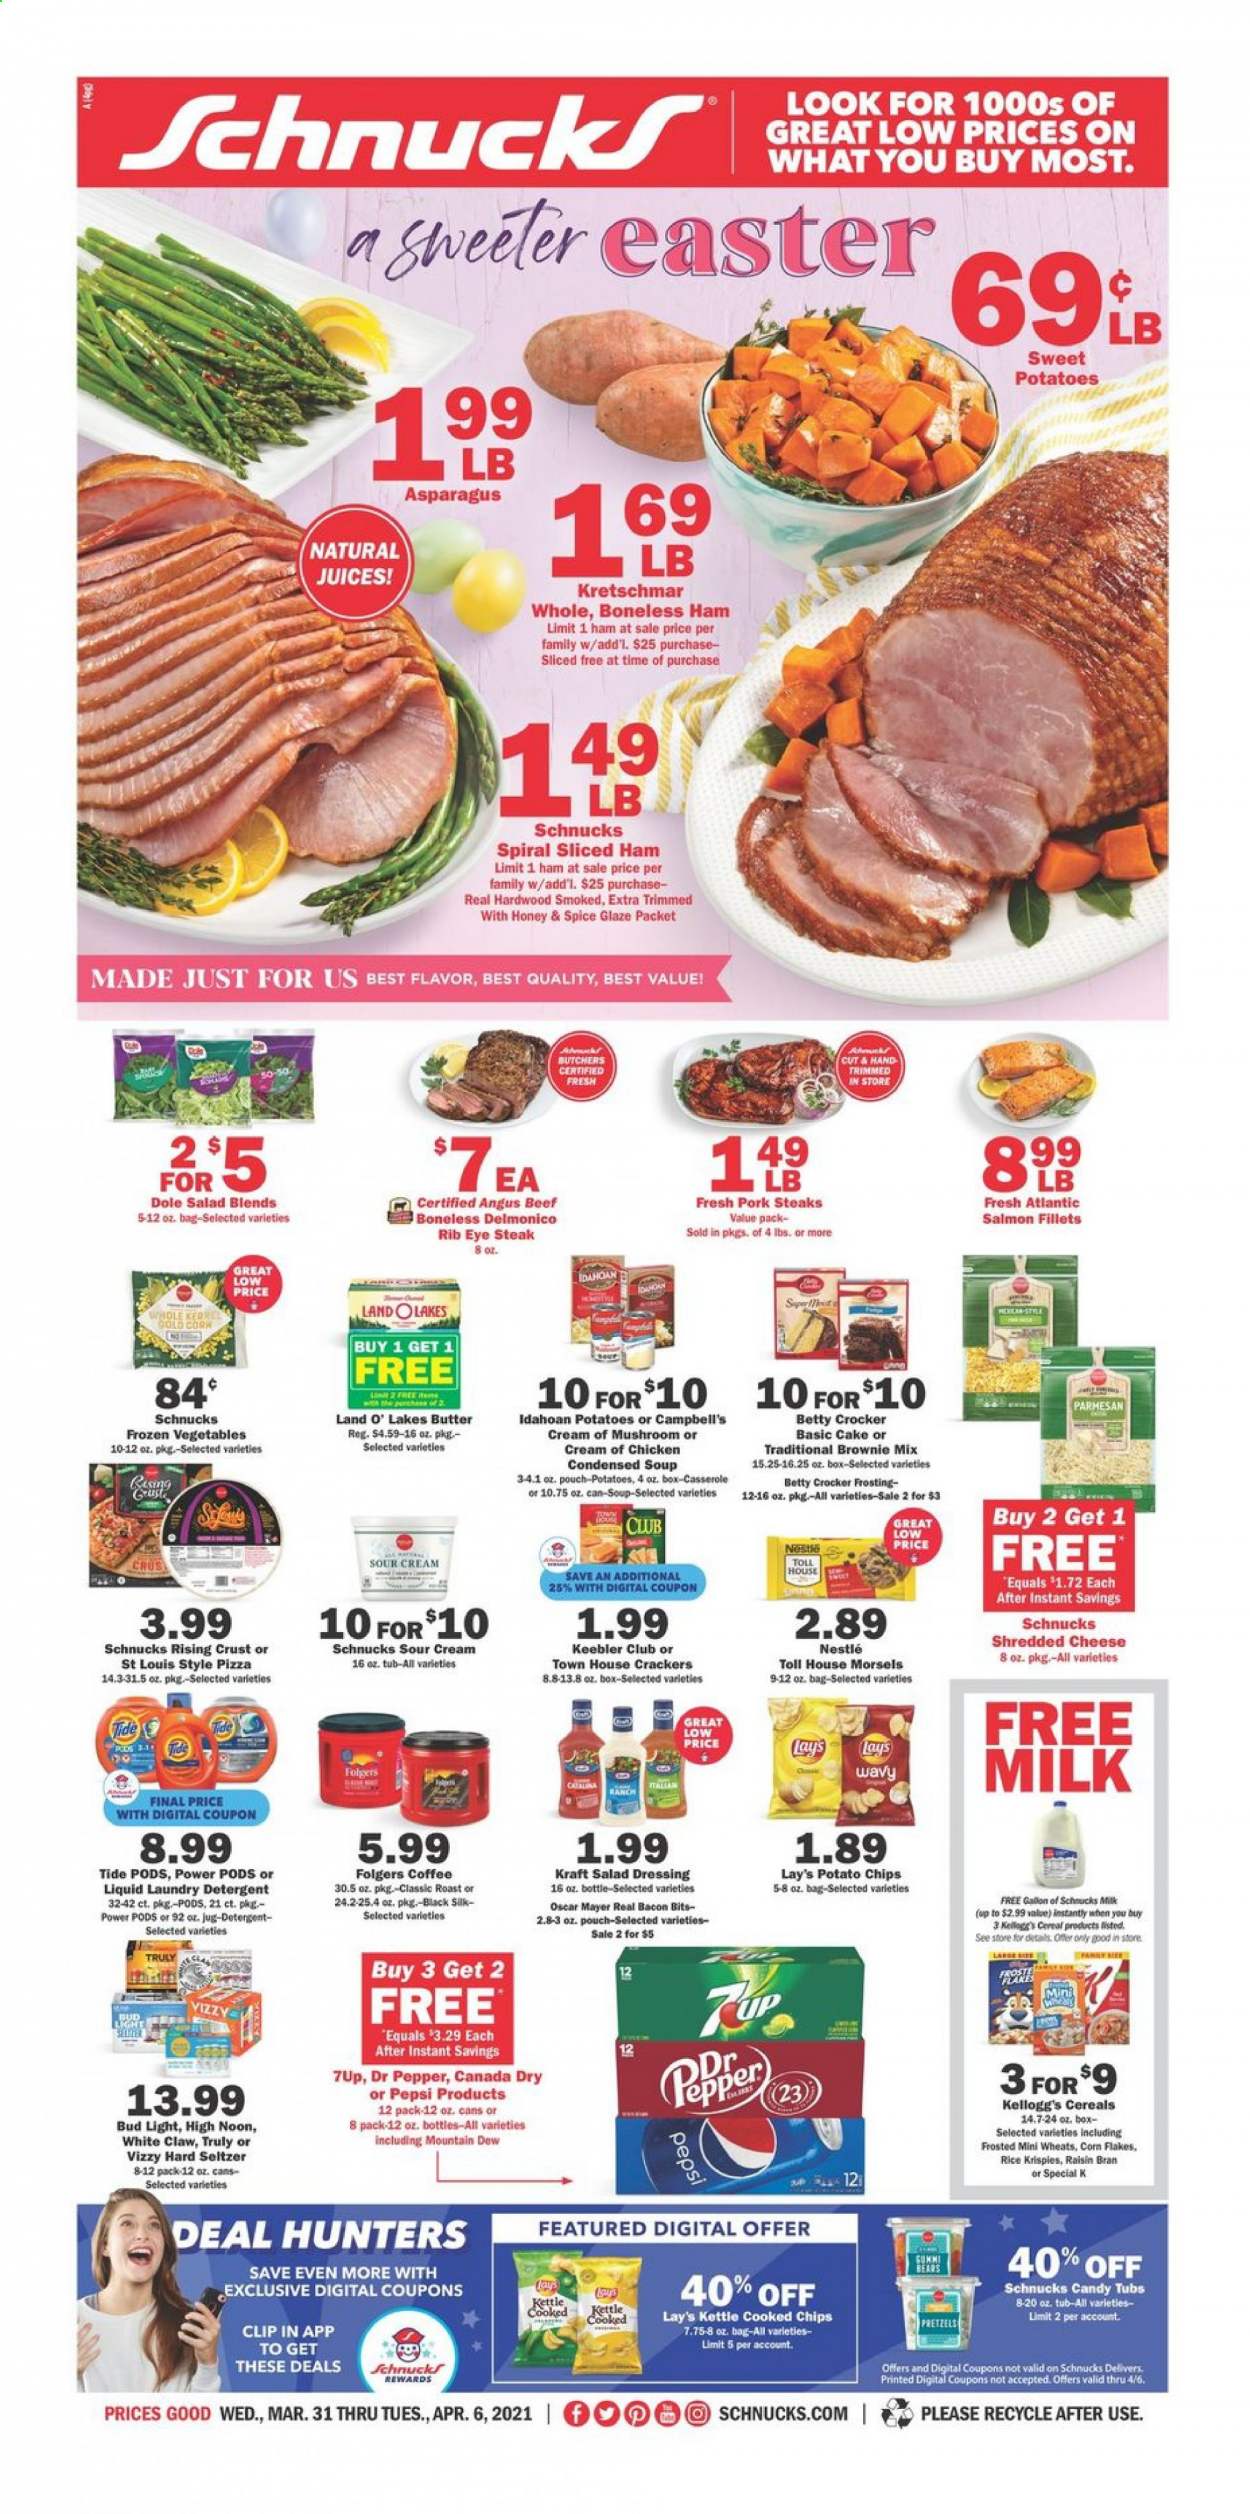 thumbnail - Schnucks Flyer - 03/31/2021 - 04/06/2021 - Sales products - mushrooms, sweet potato, Dole, pretzels, brownie mix, cake, salmon, salmon fillet, Campbell's, pizza, condensed soup, soup, Kraft®, ham, Oscar Mayer, shredded cheese, parmesan, milk, Silk, butter, sour cream, frozen vegetables, Nestlé, crackers, Kellogg's, Keebler, potato chips, Lay’s, frosting, bacon bits, cereals, corn flakes, Rice Krispies, Raisin Bran, salad dressing, dressing, Canada Dry, Mountain Dew, Pepsi, juice, Dr. Pepper, 7UP, seltzer water, coffee, Folgers, White Claw, Hard Seltzer, TRULY, beer, Bud Light, beef meat, steak, ribeye steak, pork chops, pork meat, detergent, Tide, laundry detergent, asparagus. Page 1.